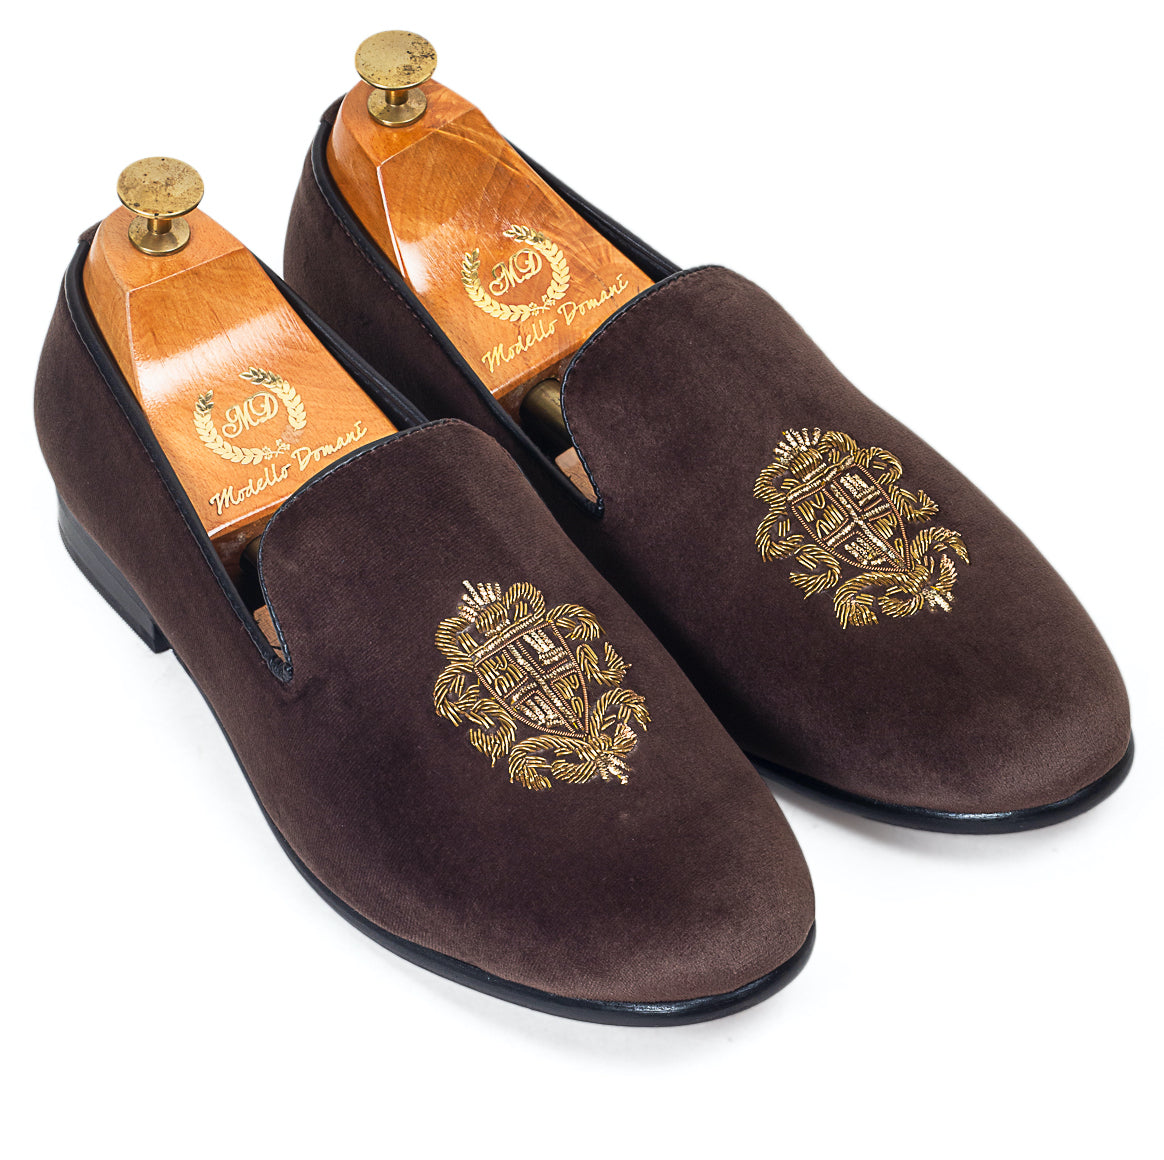 The Royal Crest©️ Slipons (Brown - Limited Edition)(Patent Copyright Artwork)